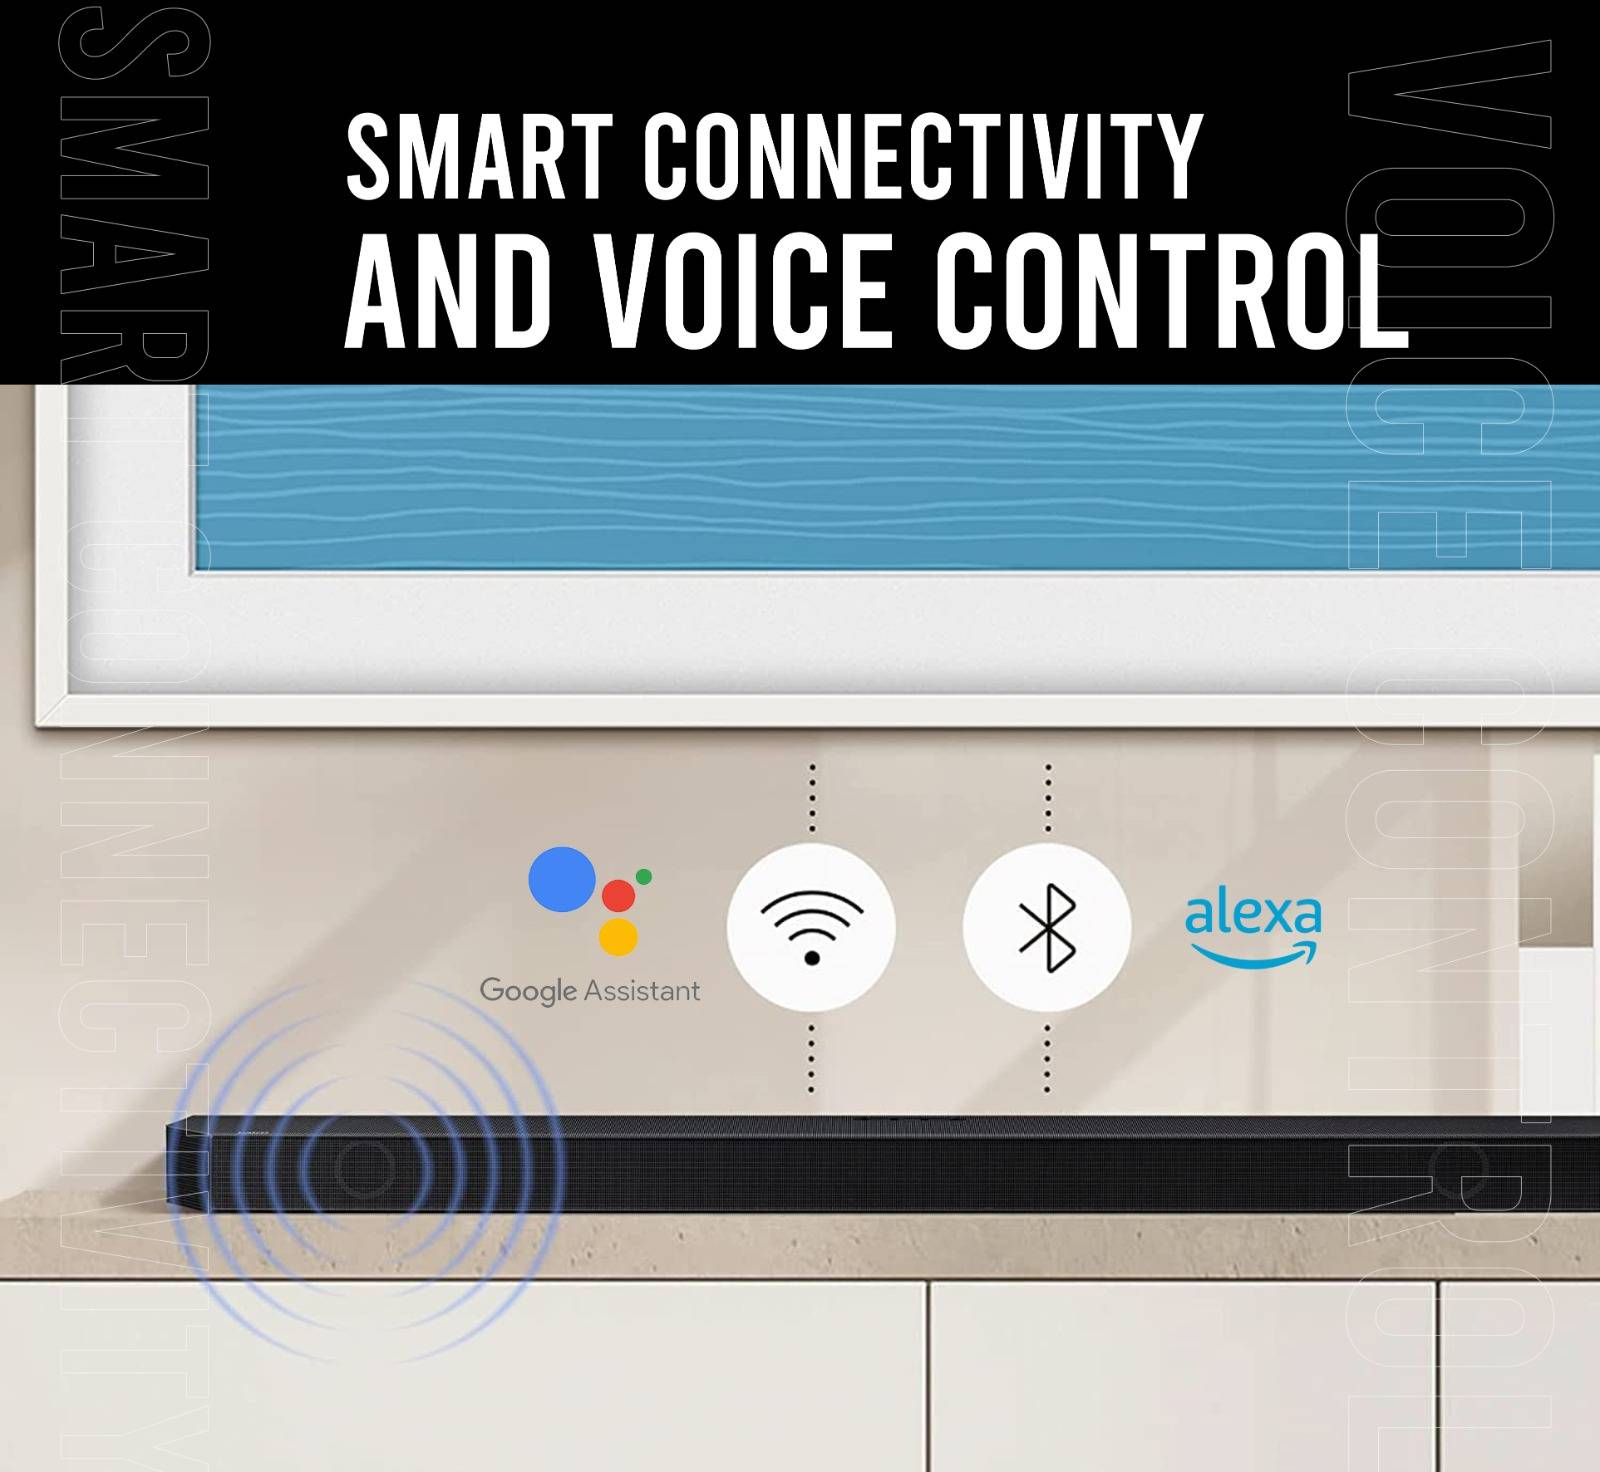 Smart Connectivity and Voice Control